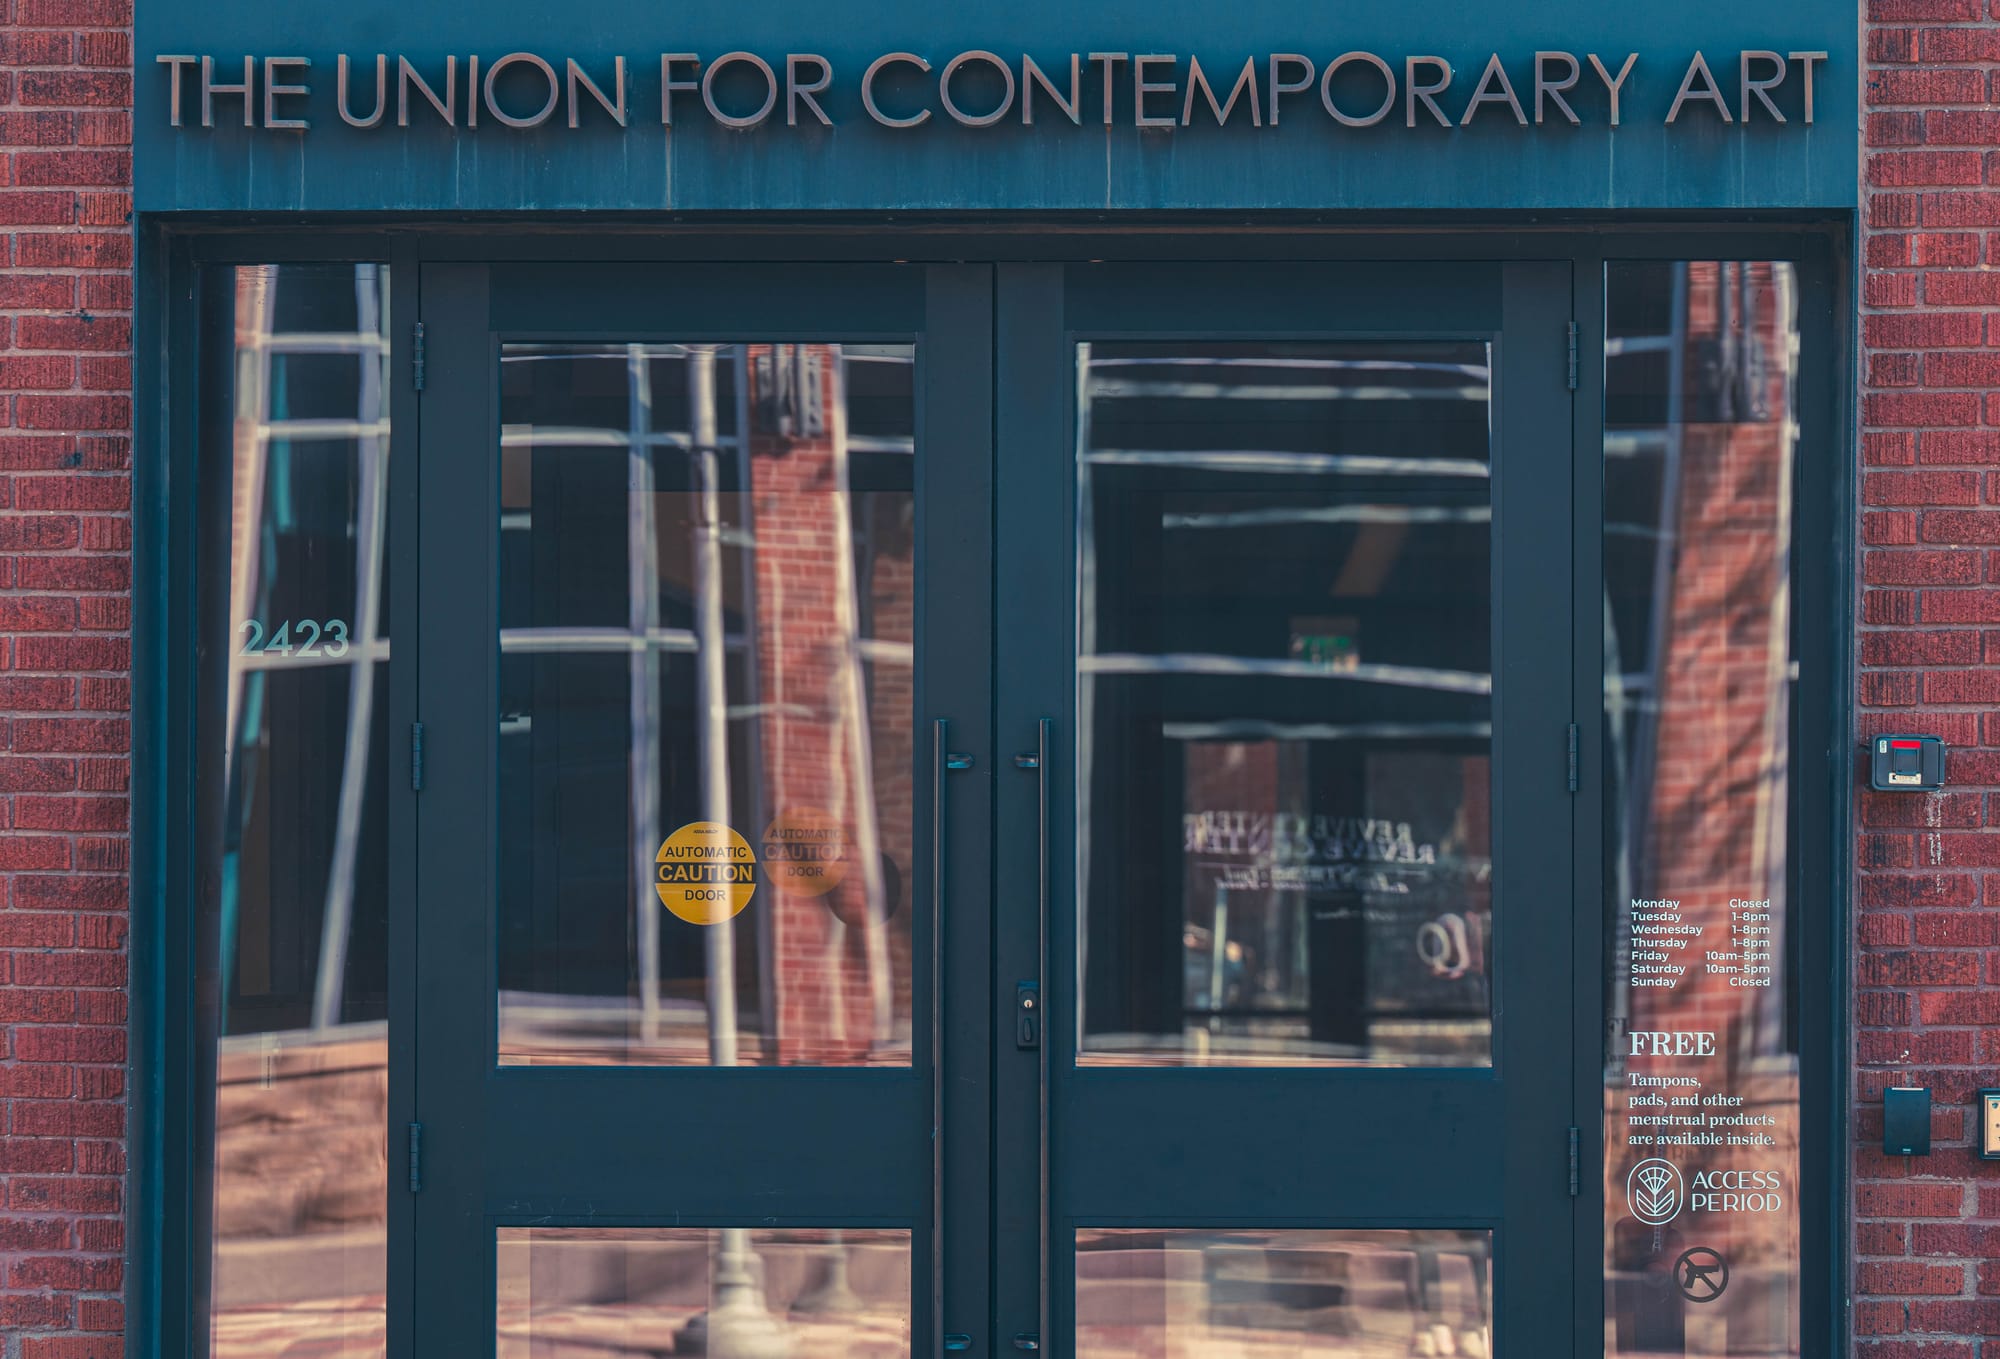 Entryway doors to a brick building. Over top of the glass doors is "The Union for Contemporary Art"